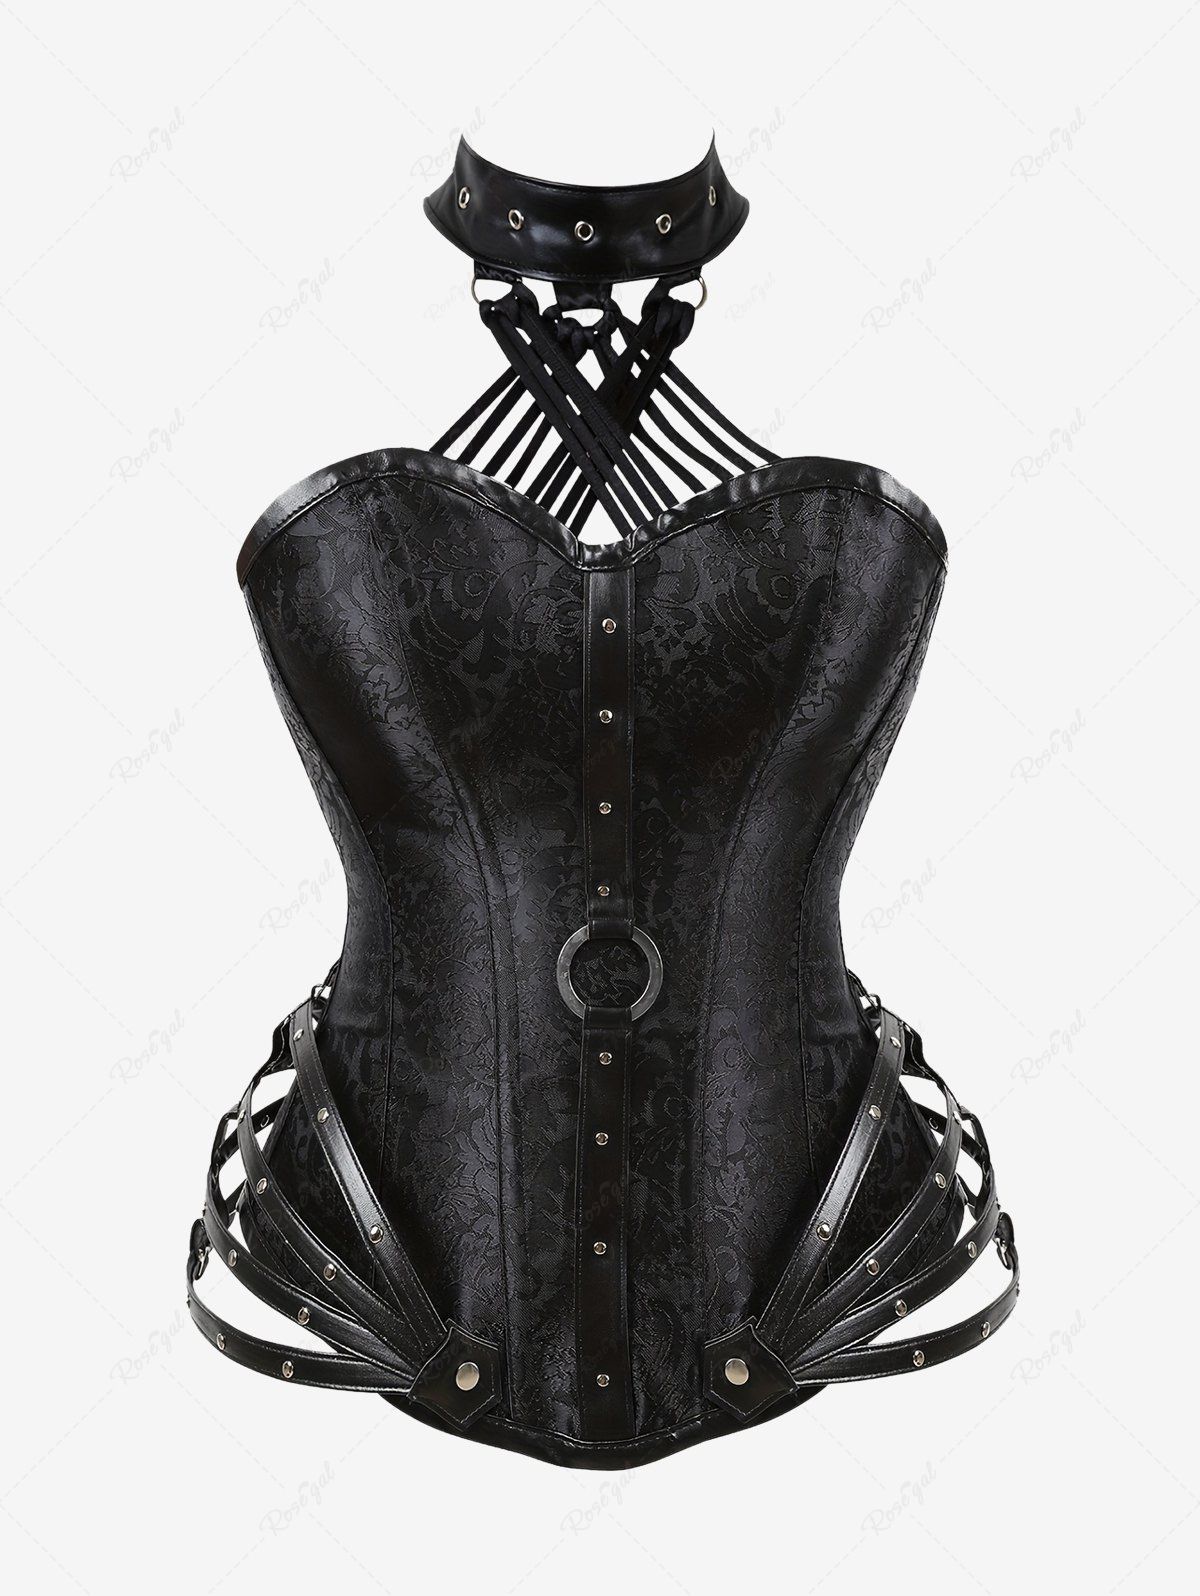 💗MARIKA LOVES💗 Gothic Halter Crisscross PU Leather Strappy Overbust Corset